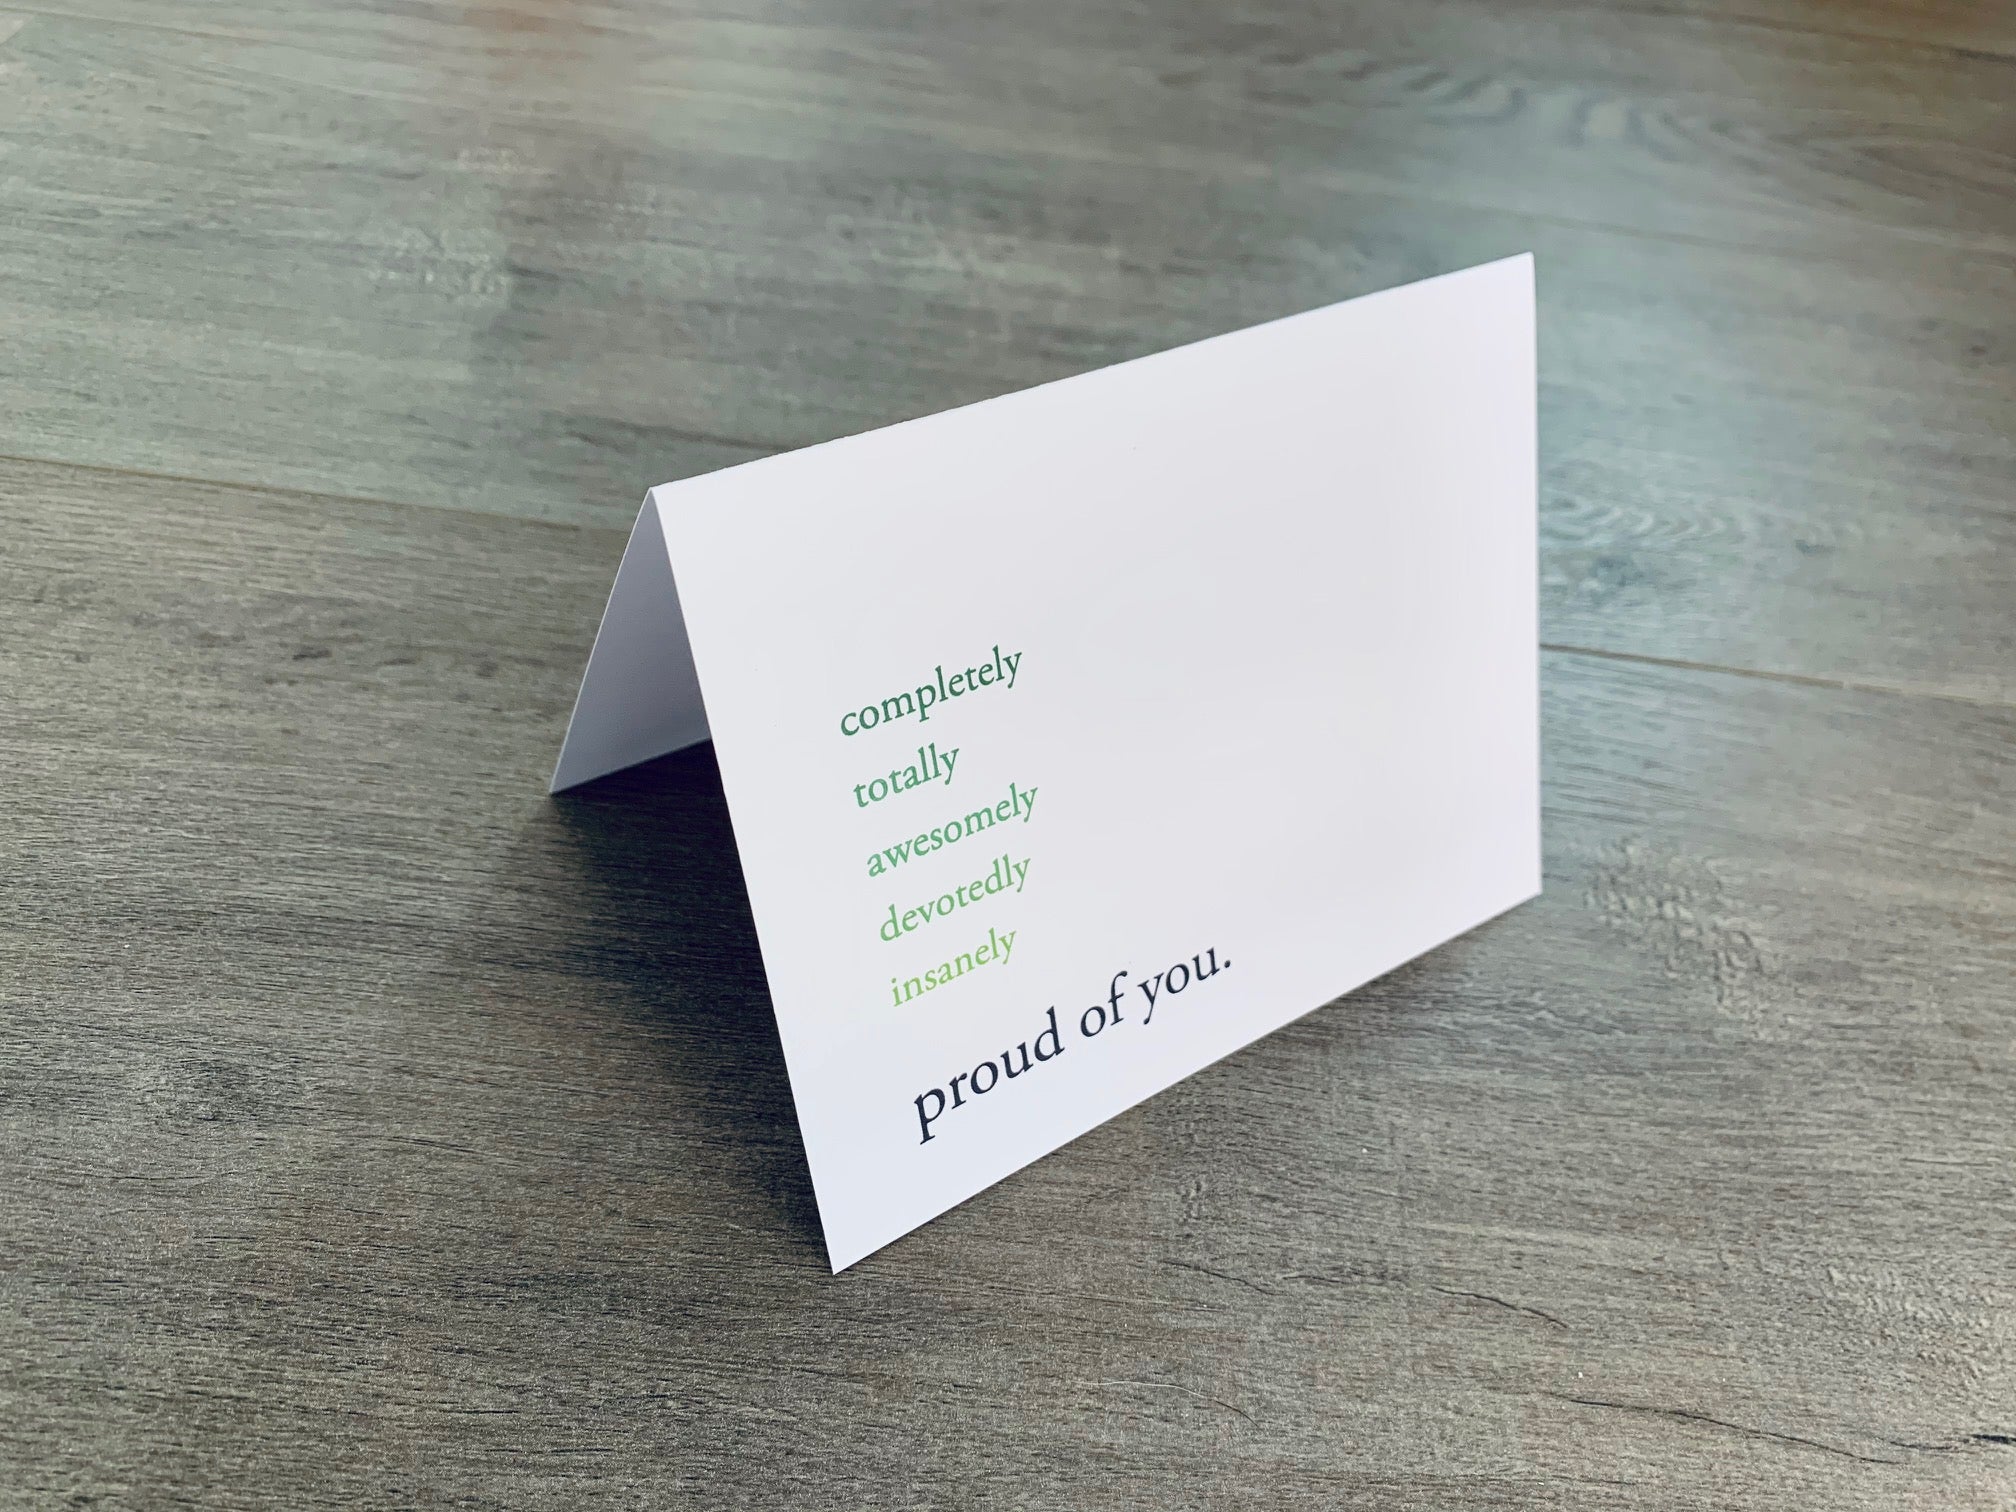 A white, folded notecard sits on a wooden floor. The card says, "completely. totally. awesomely. devotedly. insanely. proud of you." Congrats collection by Stationare.